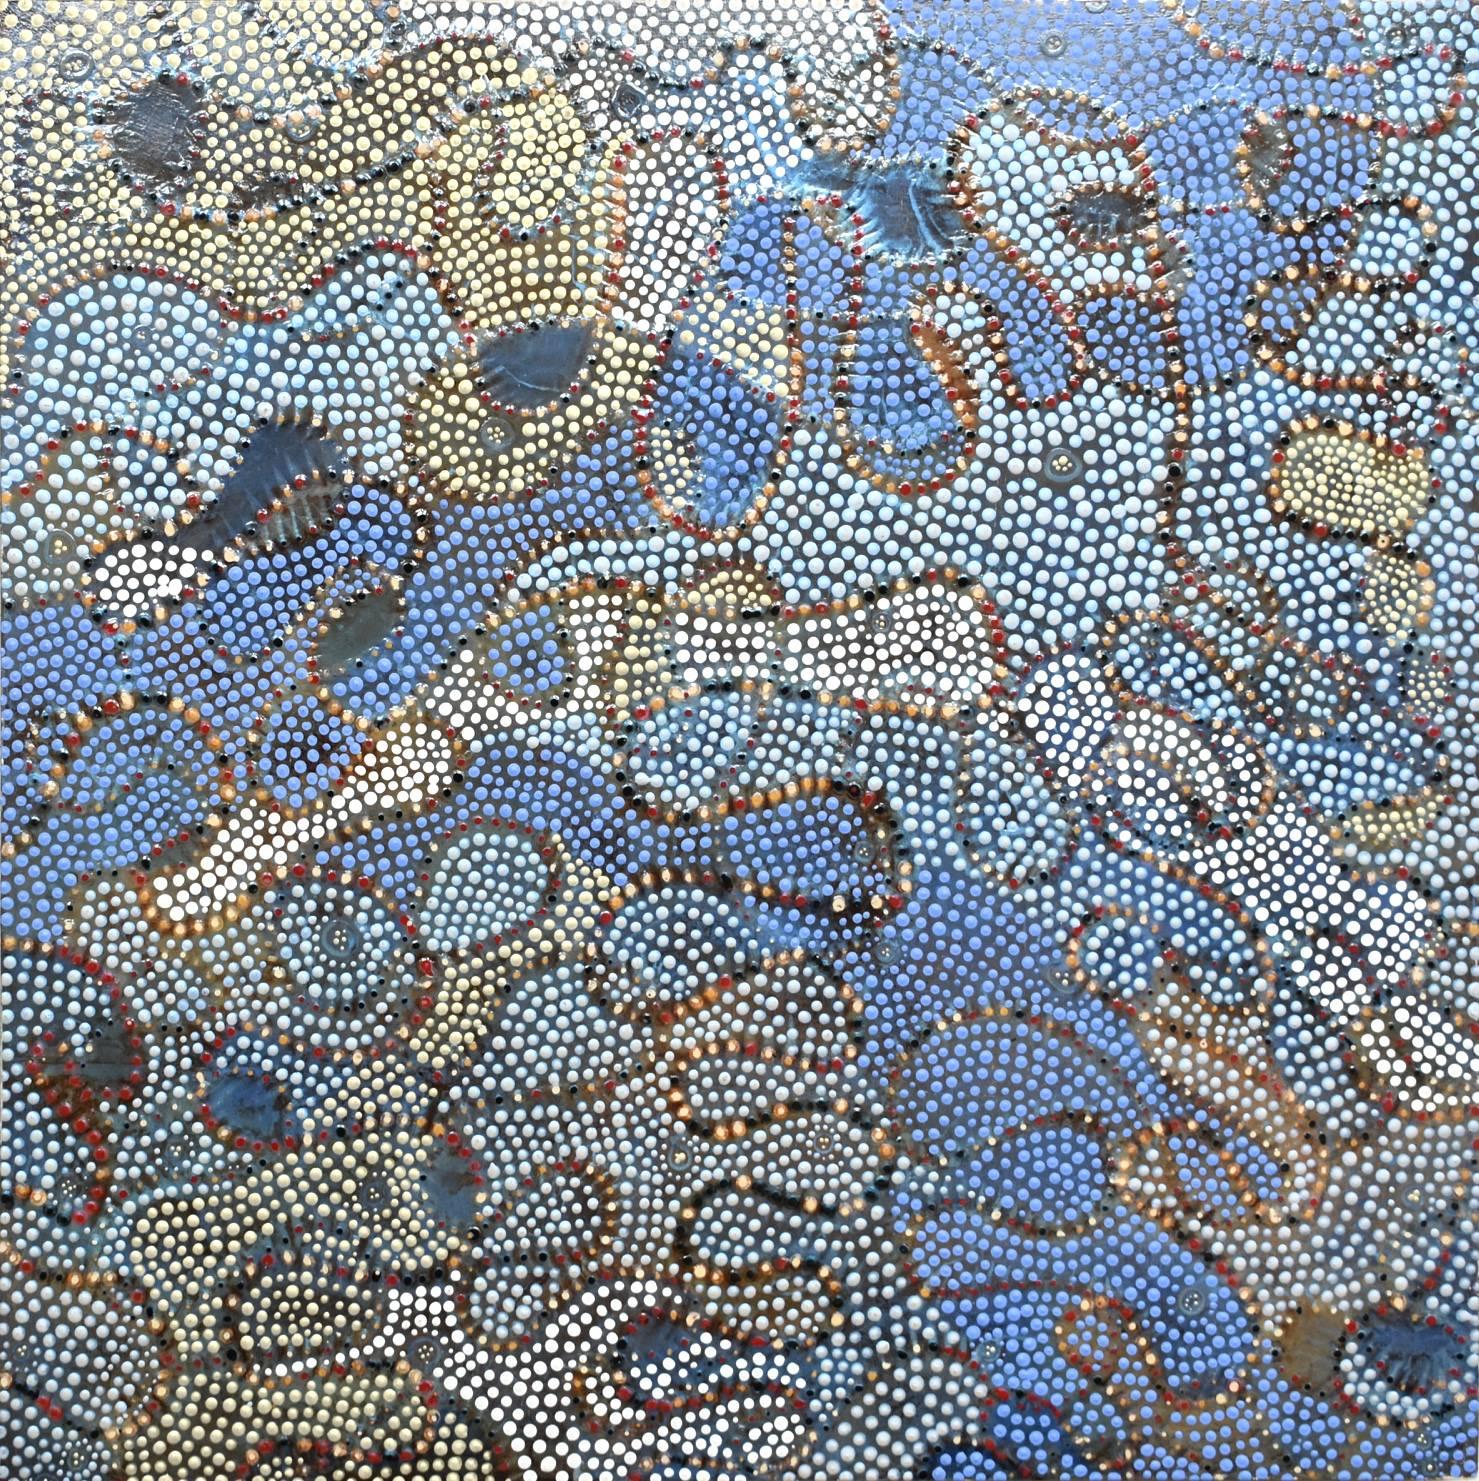 "Indra's Web 2", acrylic painting, abstract, white, blue, gold, black, dots - Painting by Denise Driscoll